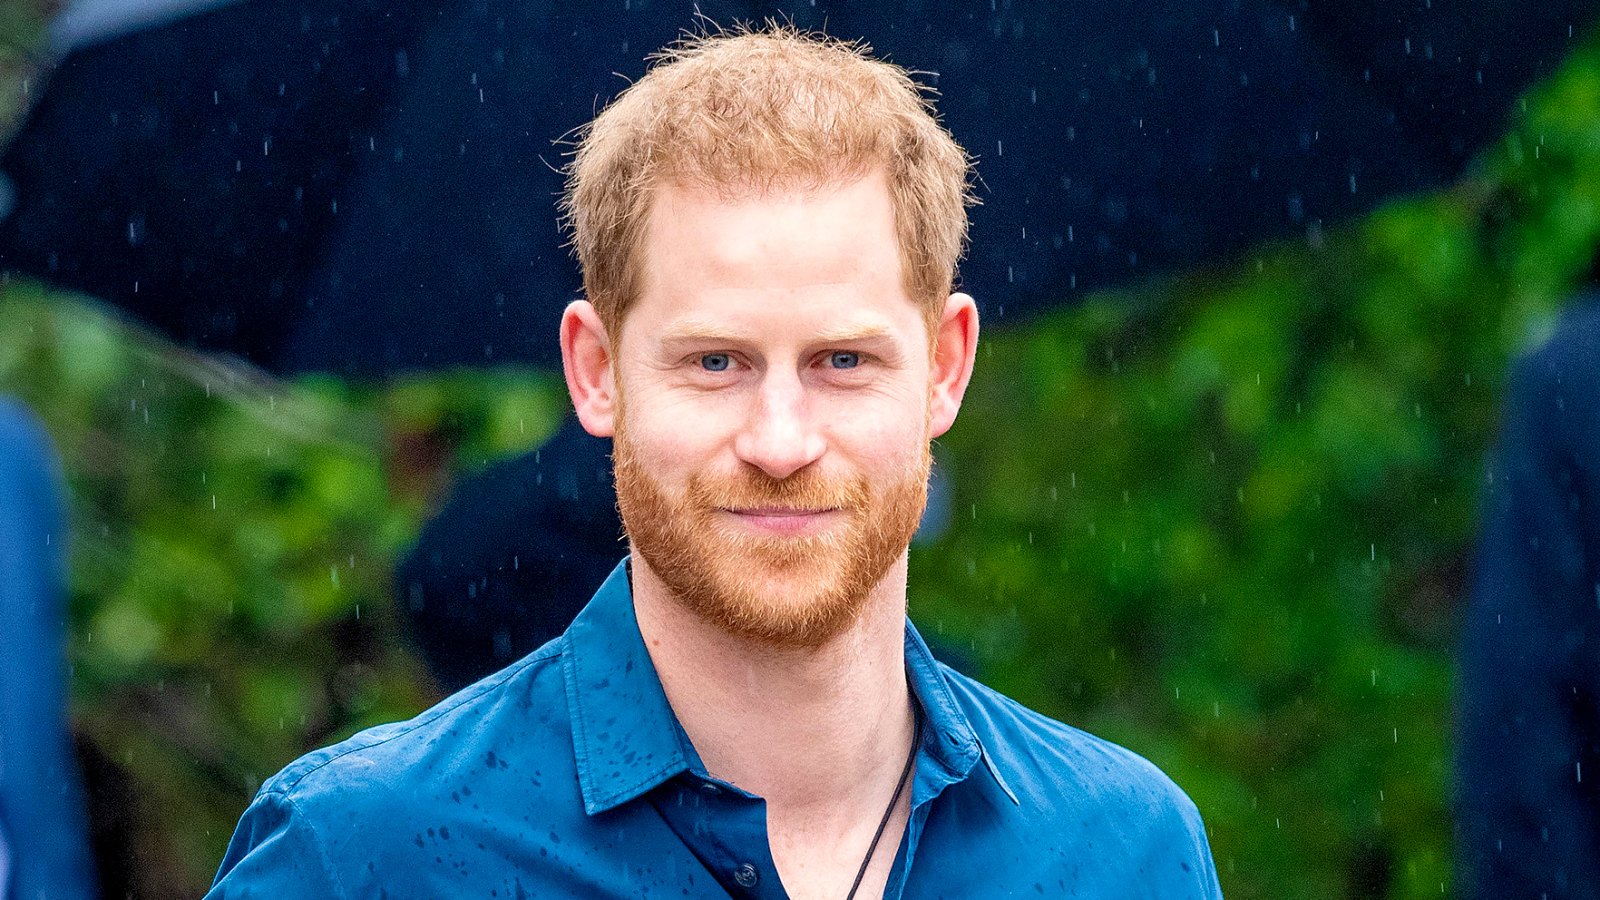 Prince Harry Describes Pressure as a Father to Give Children the Future They Deserve